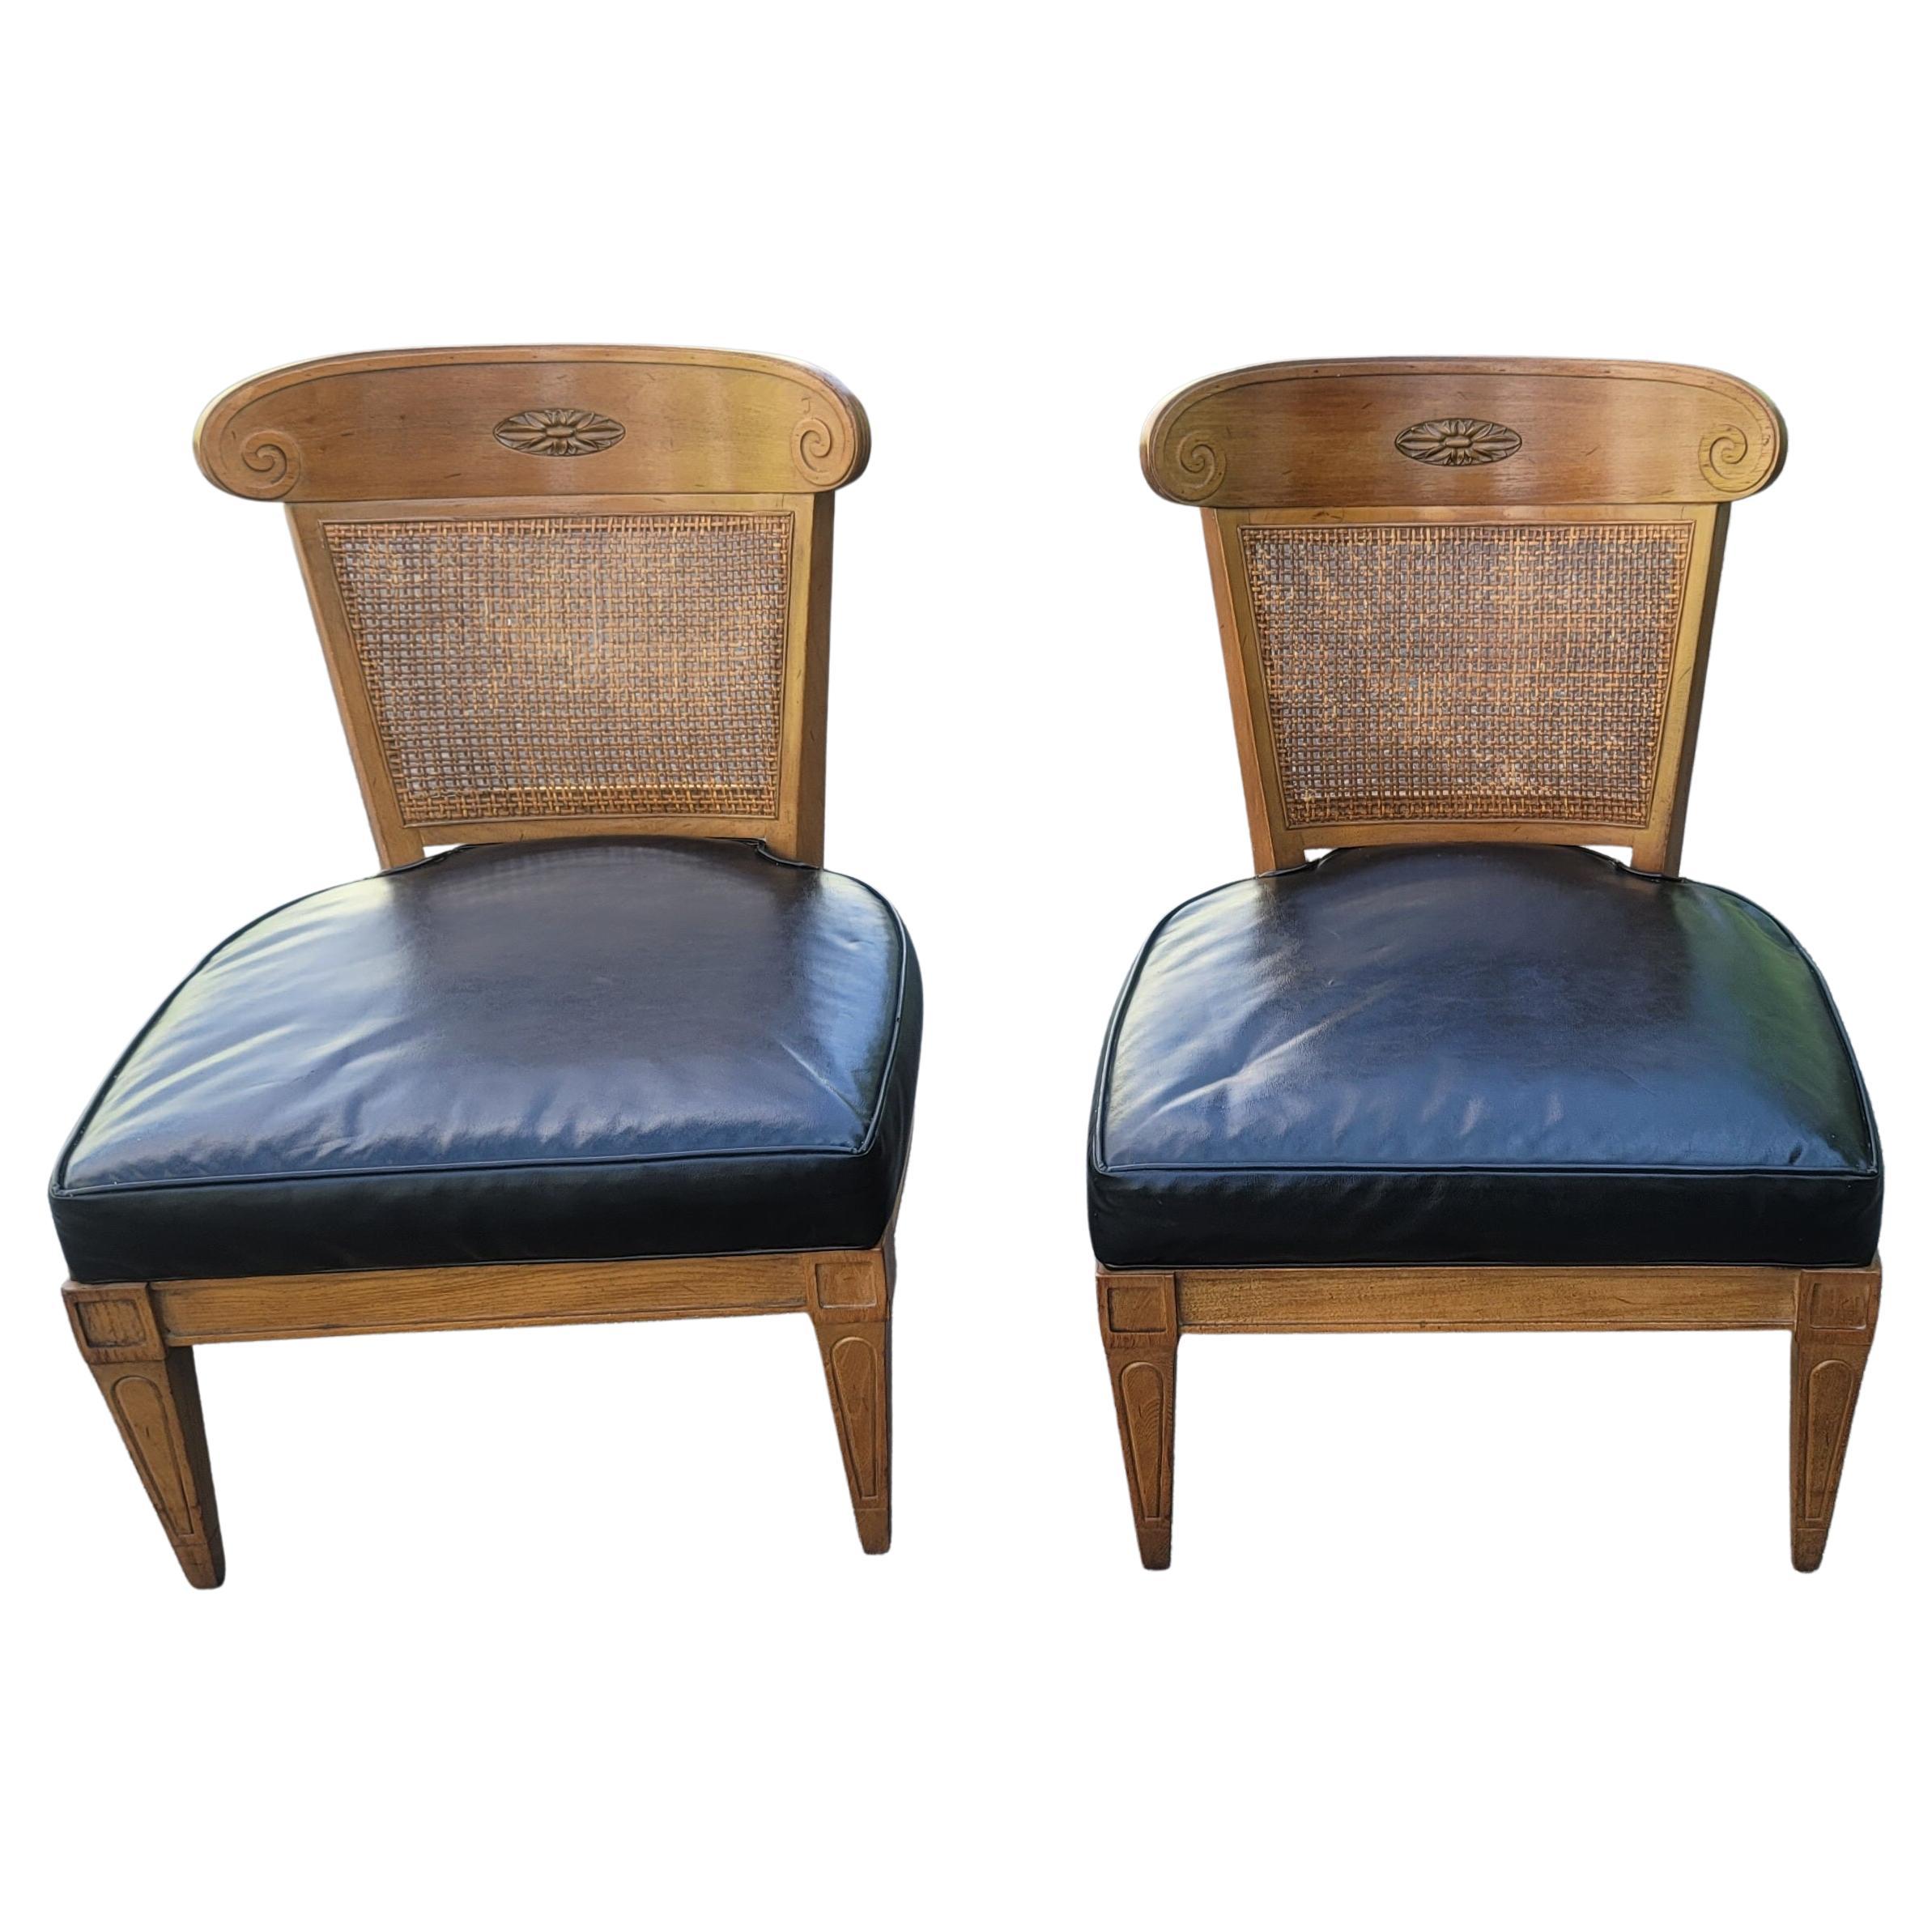 A gorgeous pair of vintage Mid-Century Modern slipper lounge chairs by American of Martinsville. They have a walnut frame with cane back and faux leather seat and are in good vintage condition. They are structurally sound, with wiggles or shimmy.